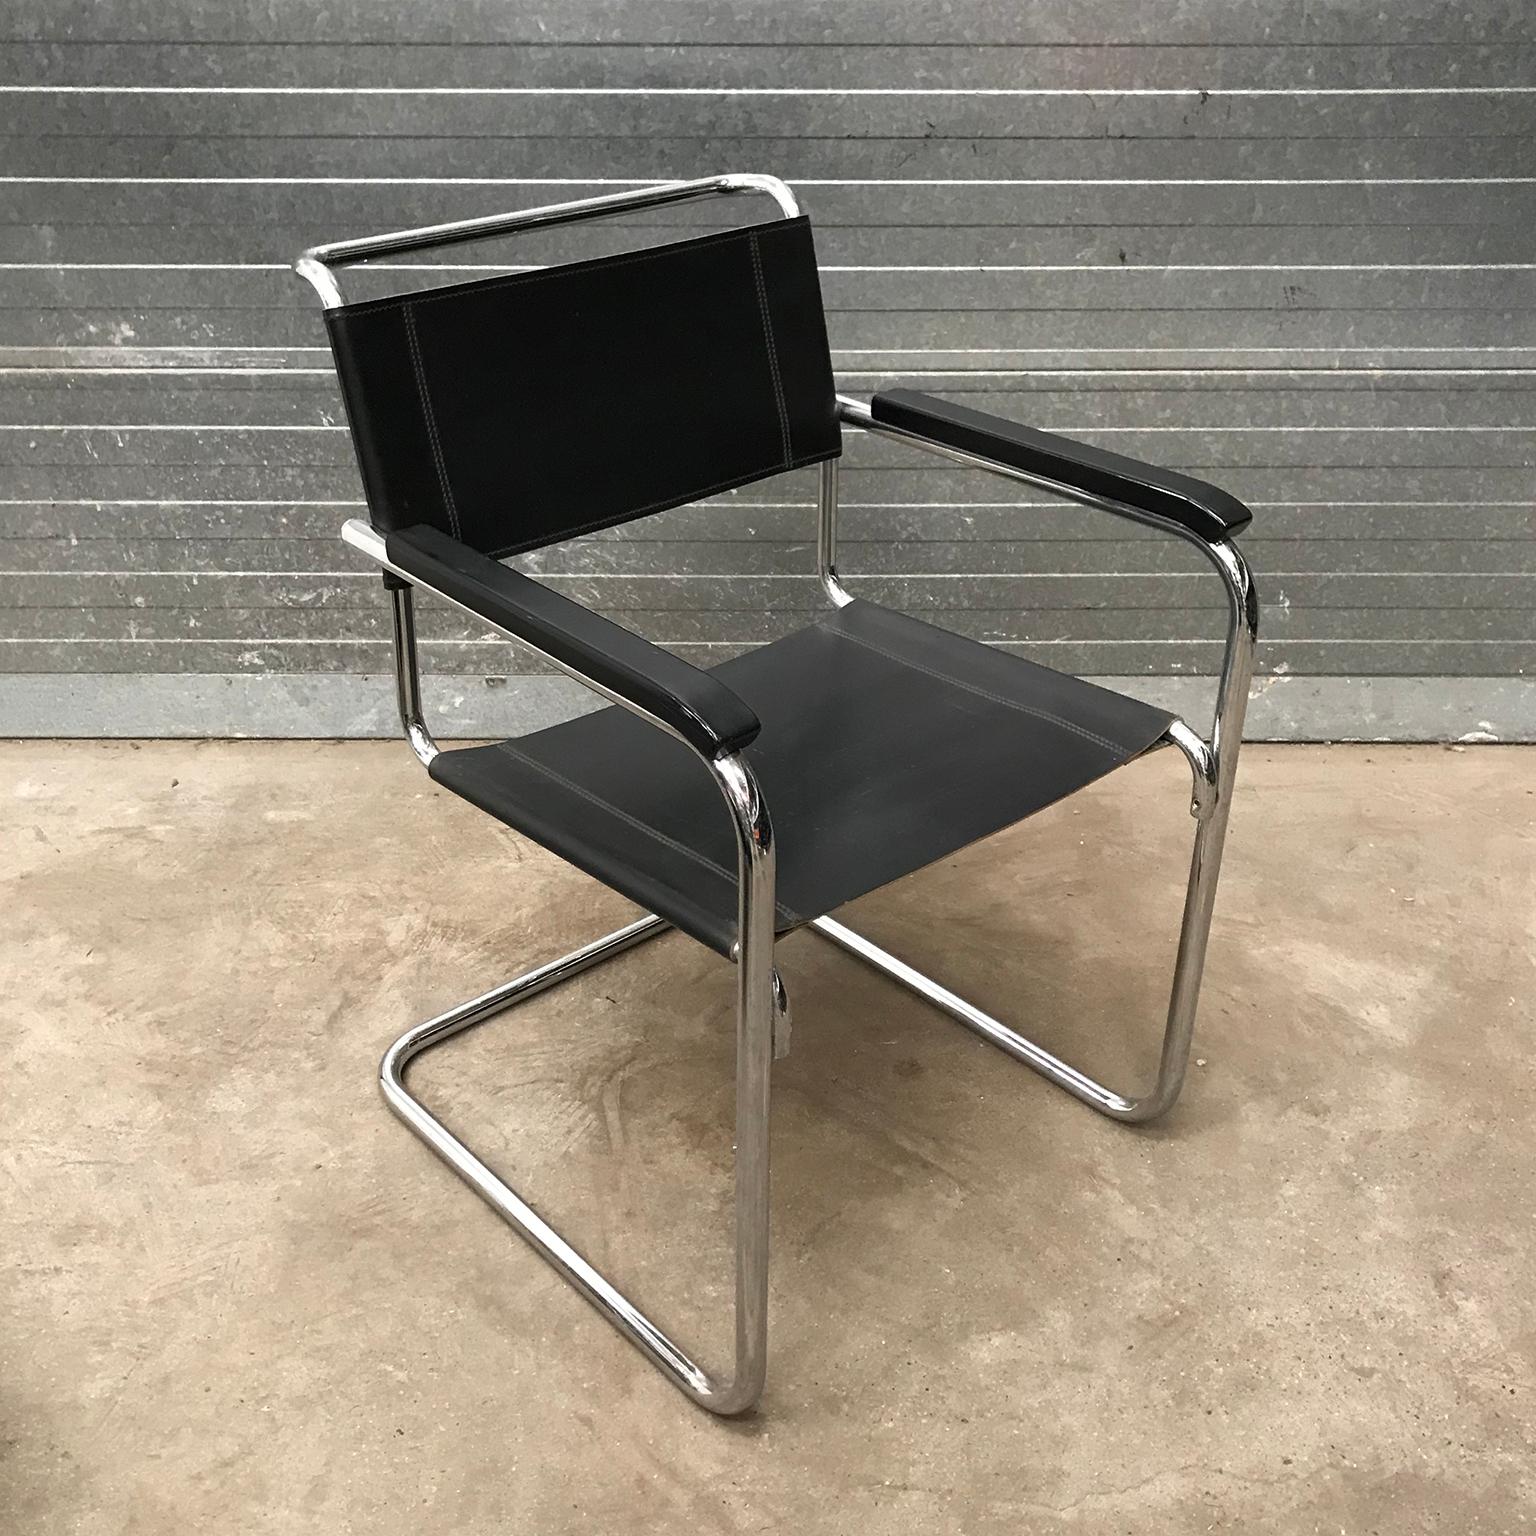 Beautiful Thonet chair with back leather seat and backrest and black armrests. The chair is in good condition except for some traces of wear like some minor scratches on the seat (pictures #12 and #14), some (rusty) spots on the base (#18 - #19) and